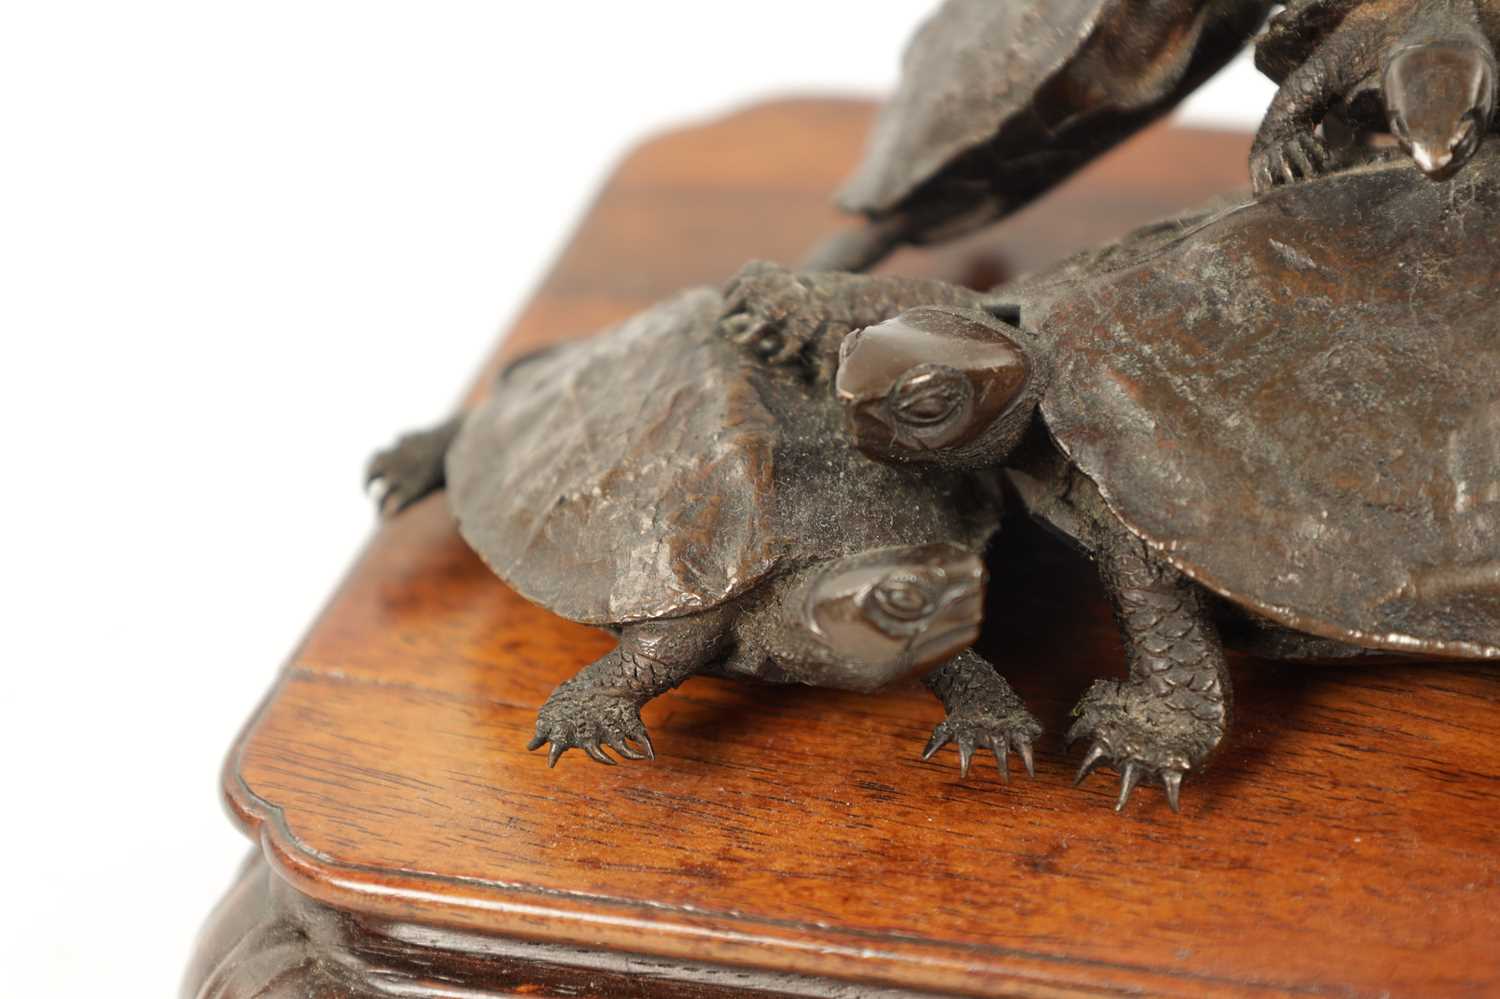 A FINE JAPANESE MEIJI PERIOD BRONZE SCULPTURE OF A GROUP OF TURTLES - Image 5 of 8